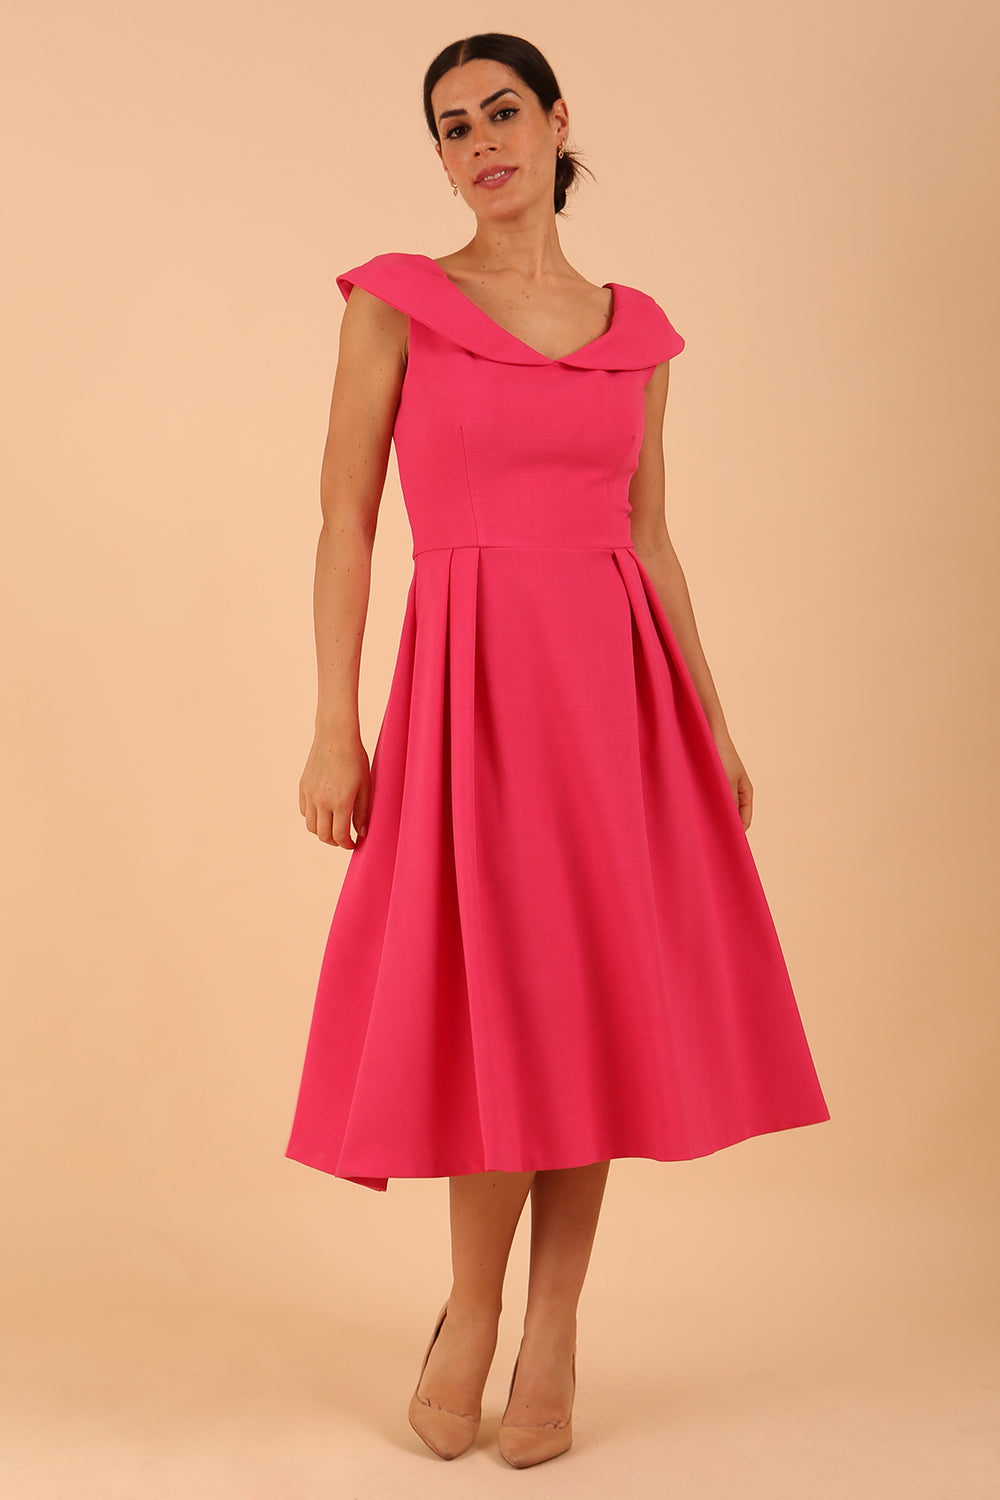 model is wearing divacatwalk Chesterton Sleeveless a-line swing dress in Fuchsia Pink with oversized collar front